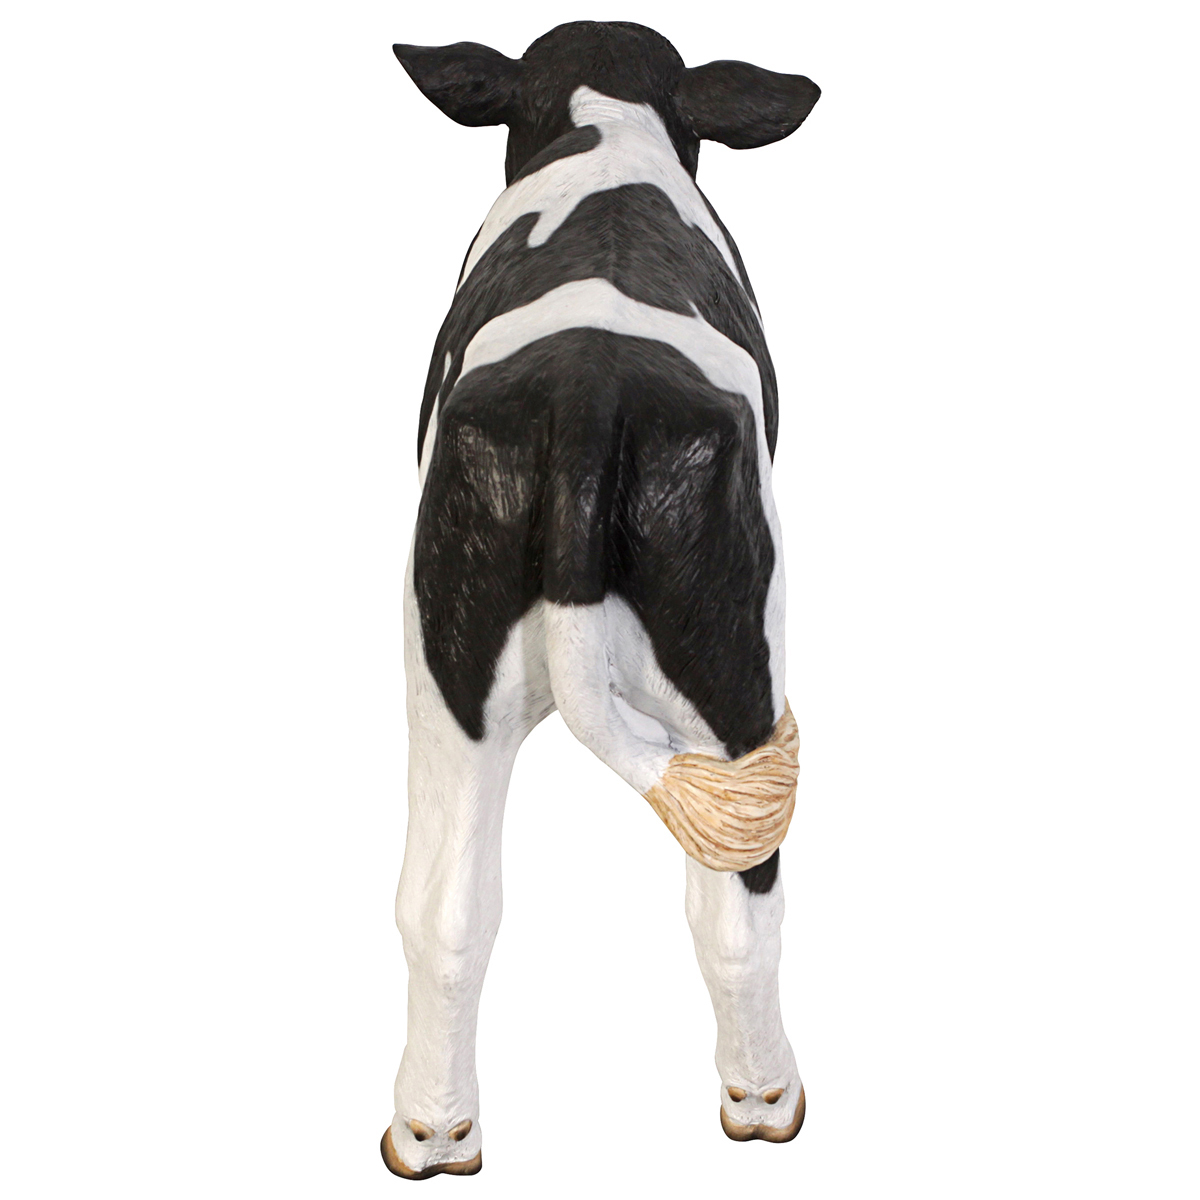 Image Thumbnail for Dt Buttercup Holstein Calf Statue